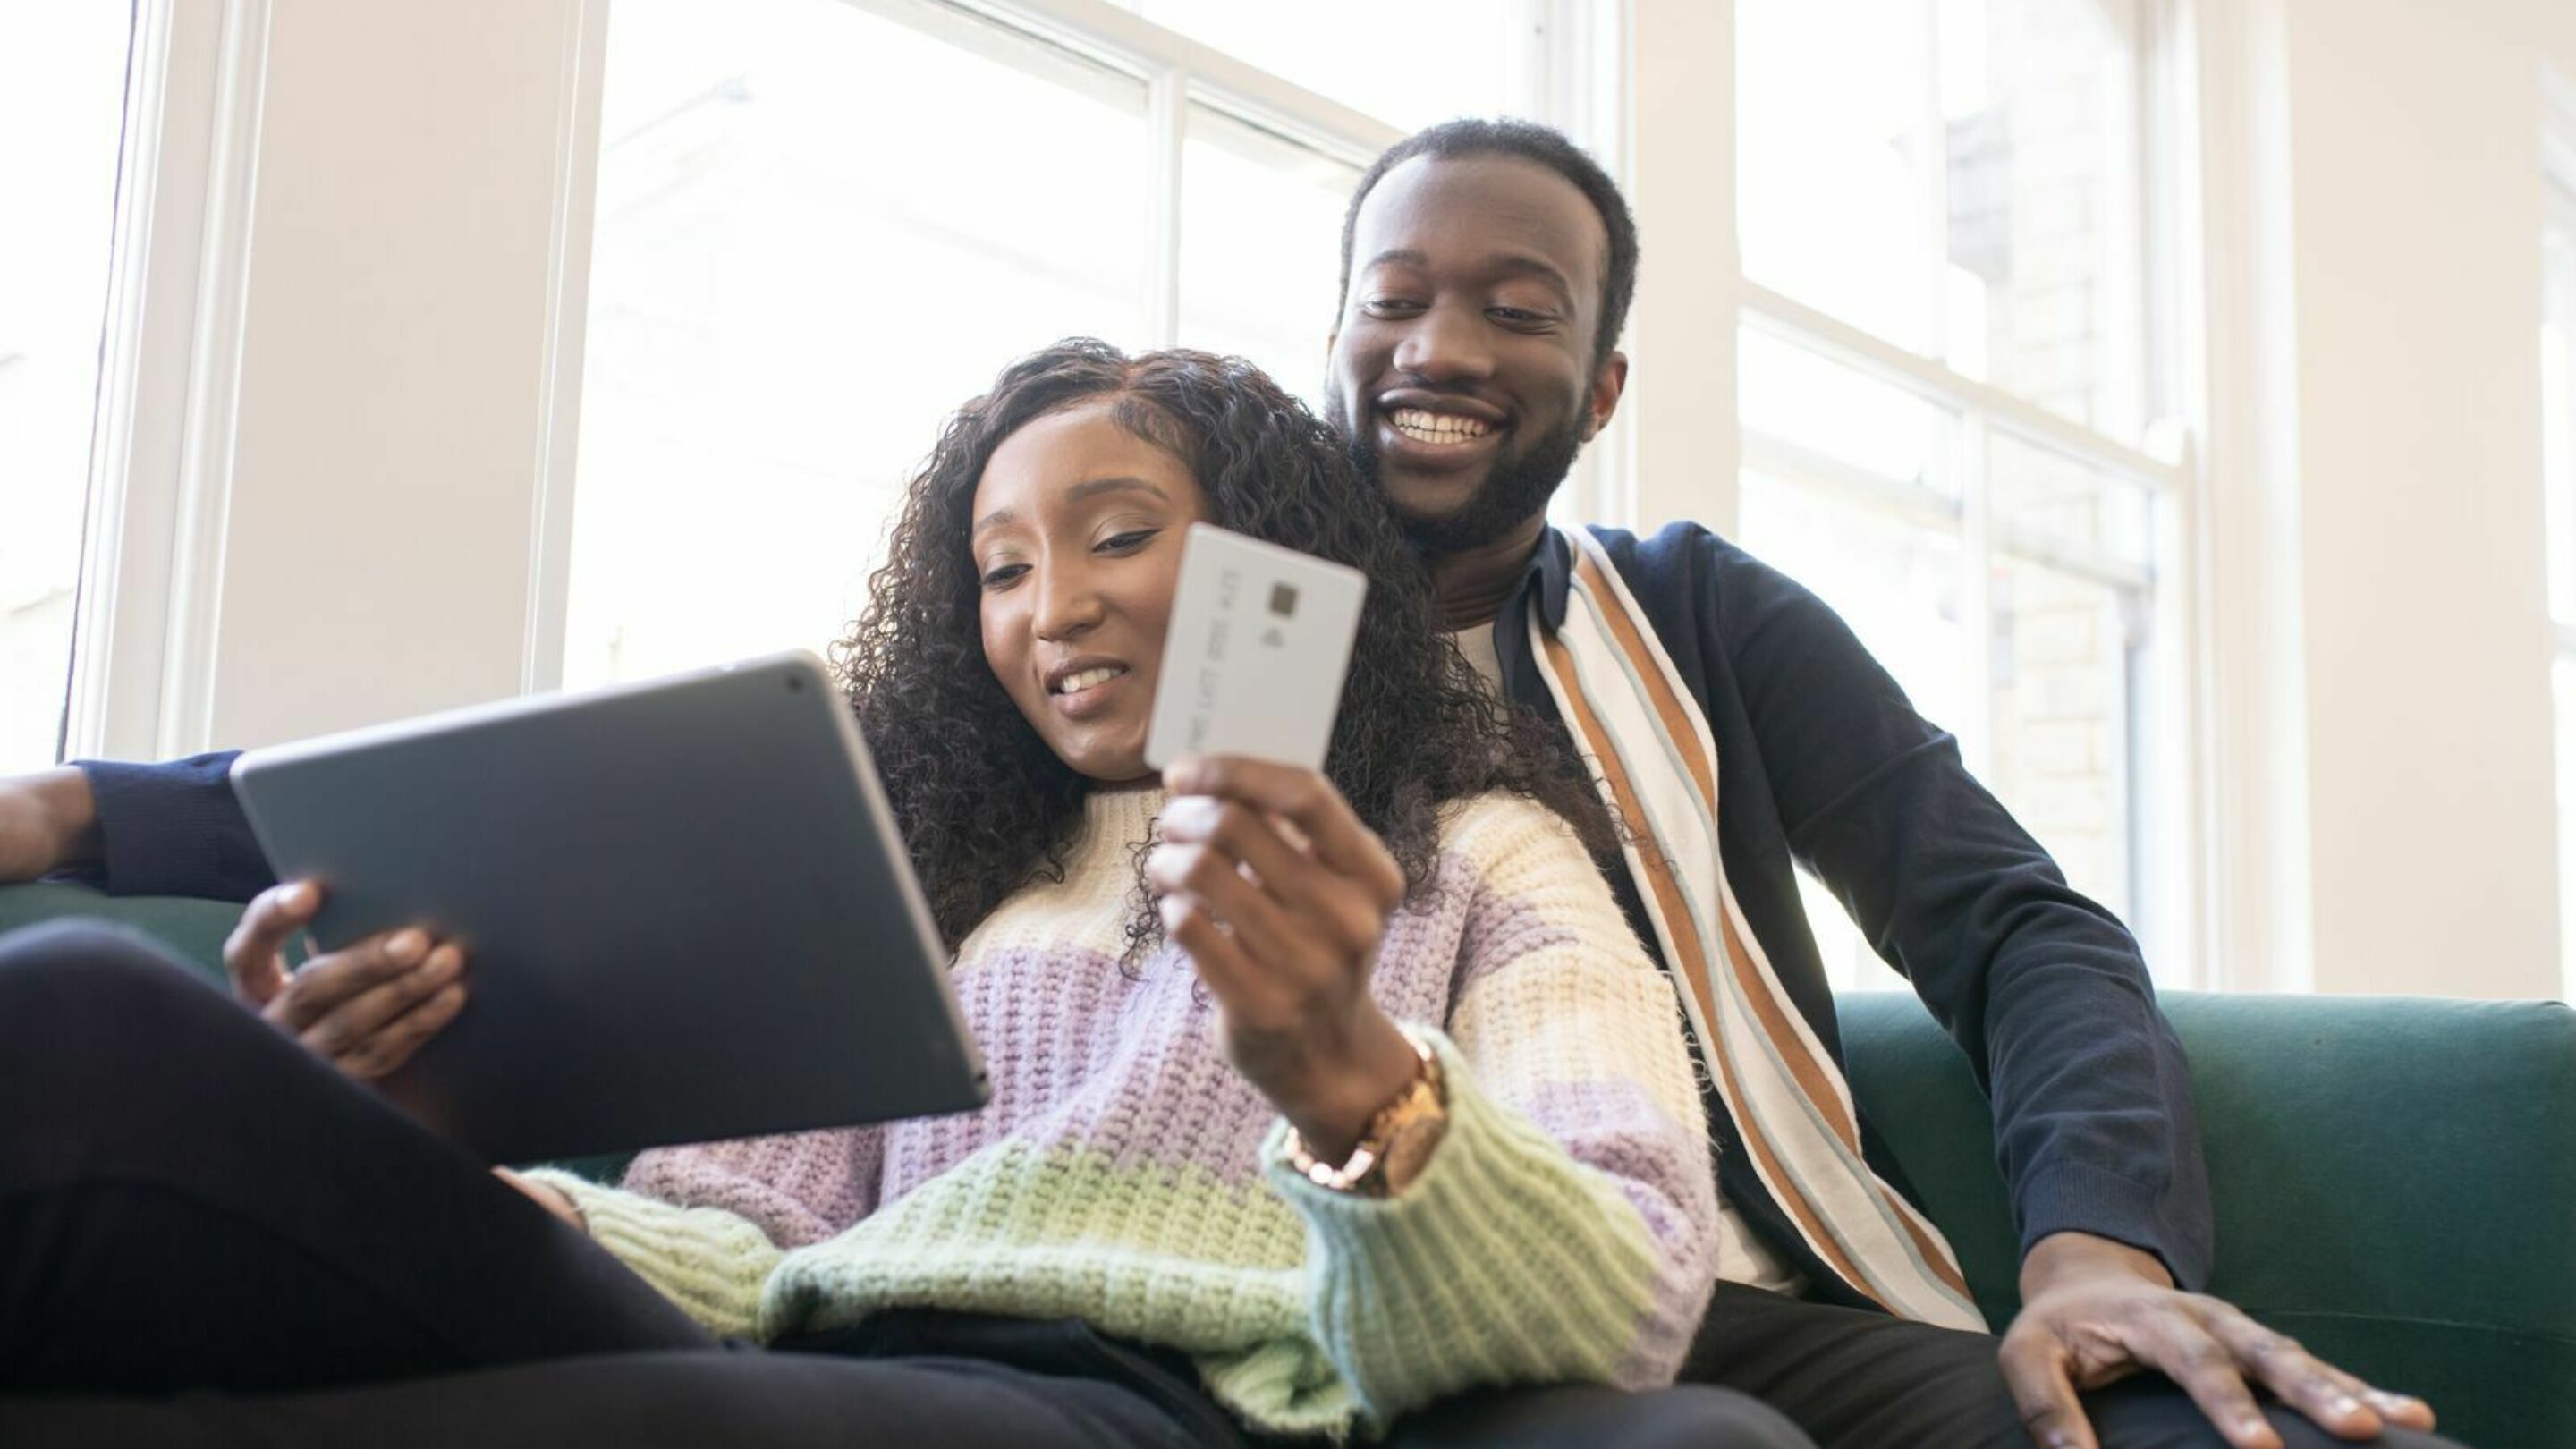 A black man and woman sat together on the sofa. She is holding a tablet and a card, and they're looking at the tablet together